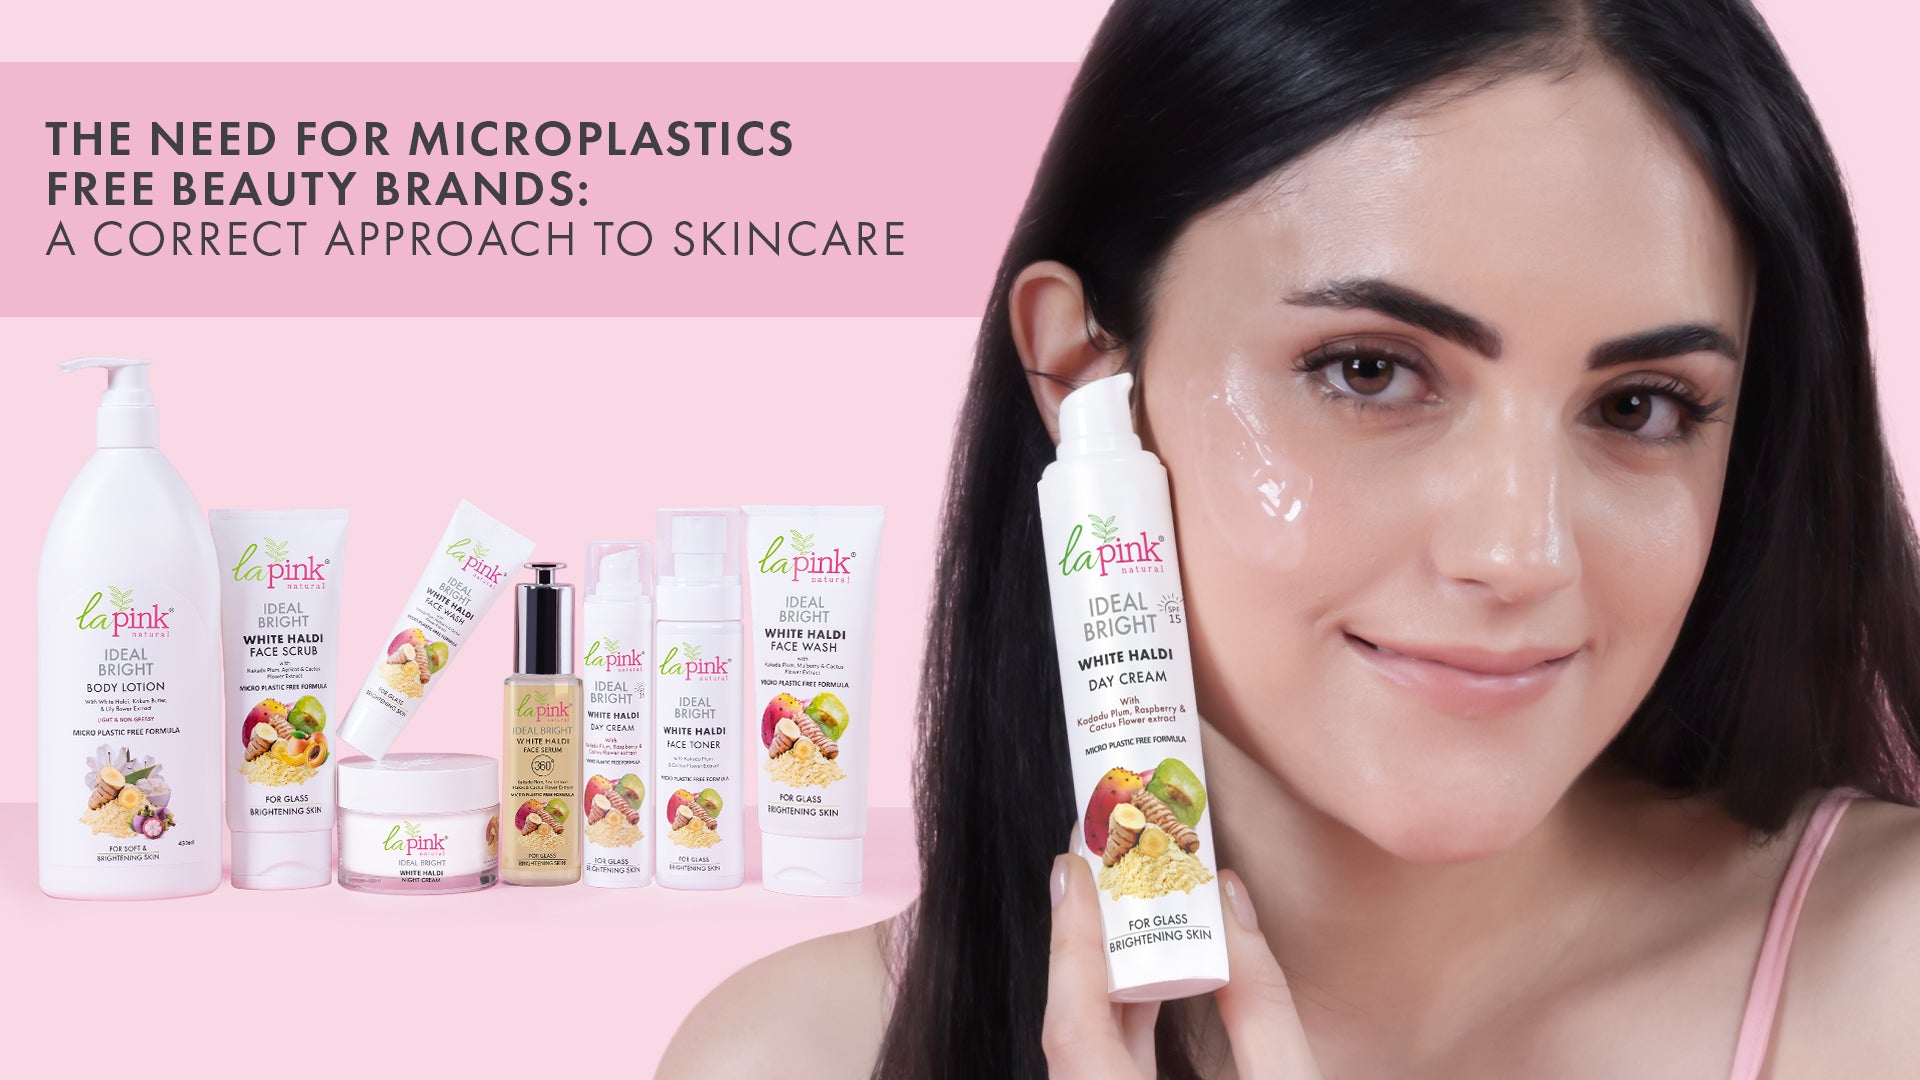 Why Do We Need Microplastics Free Beauty Brands?